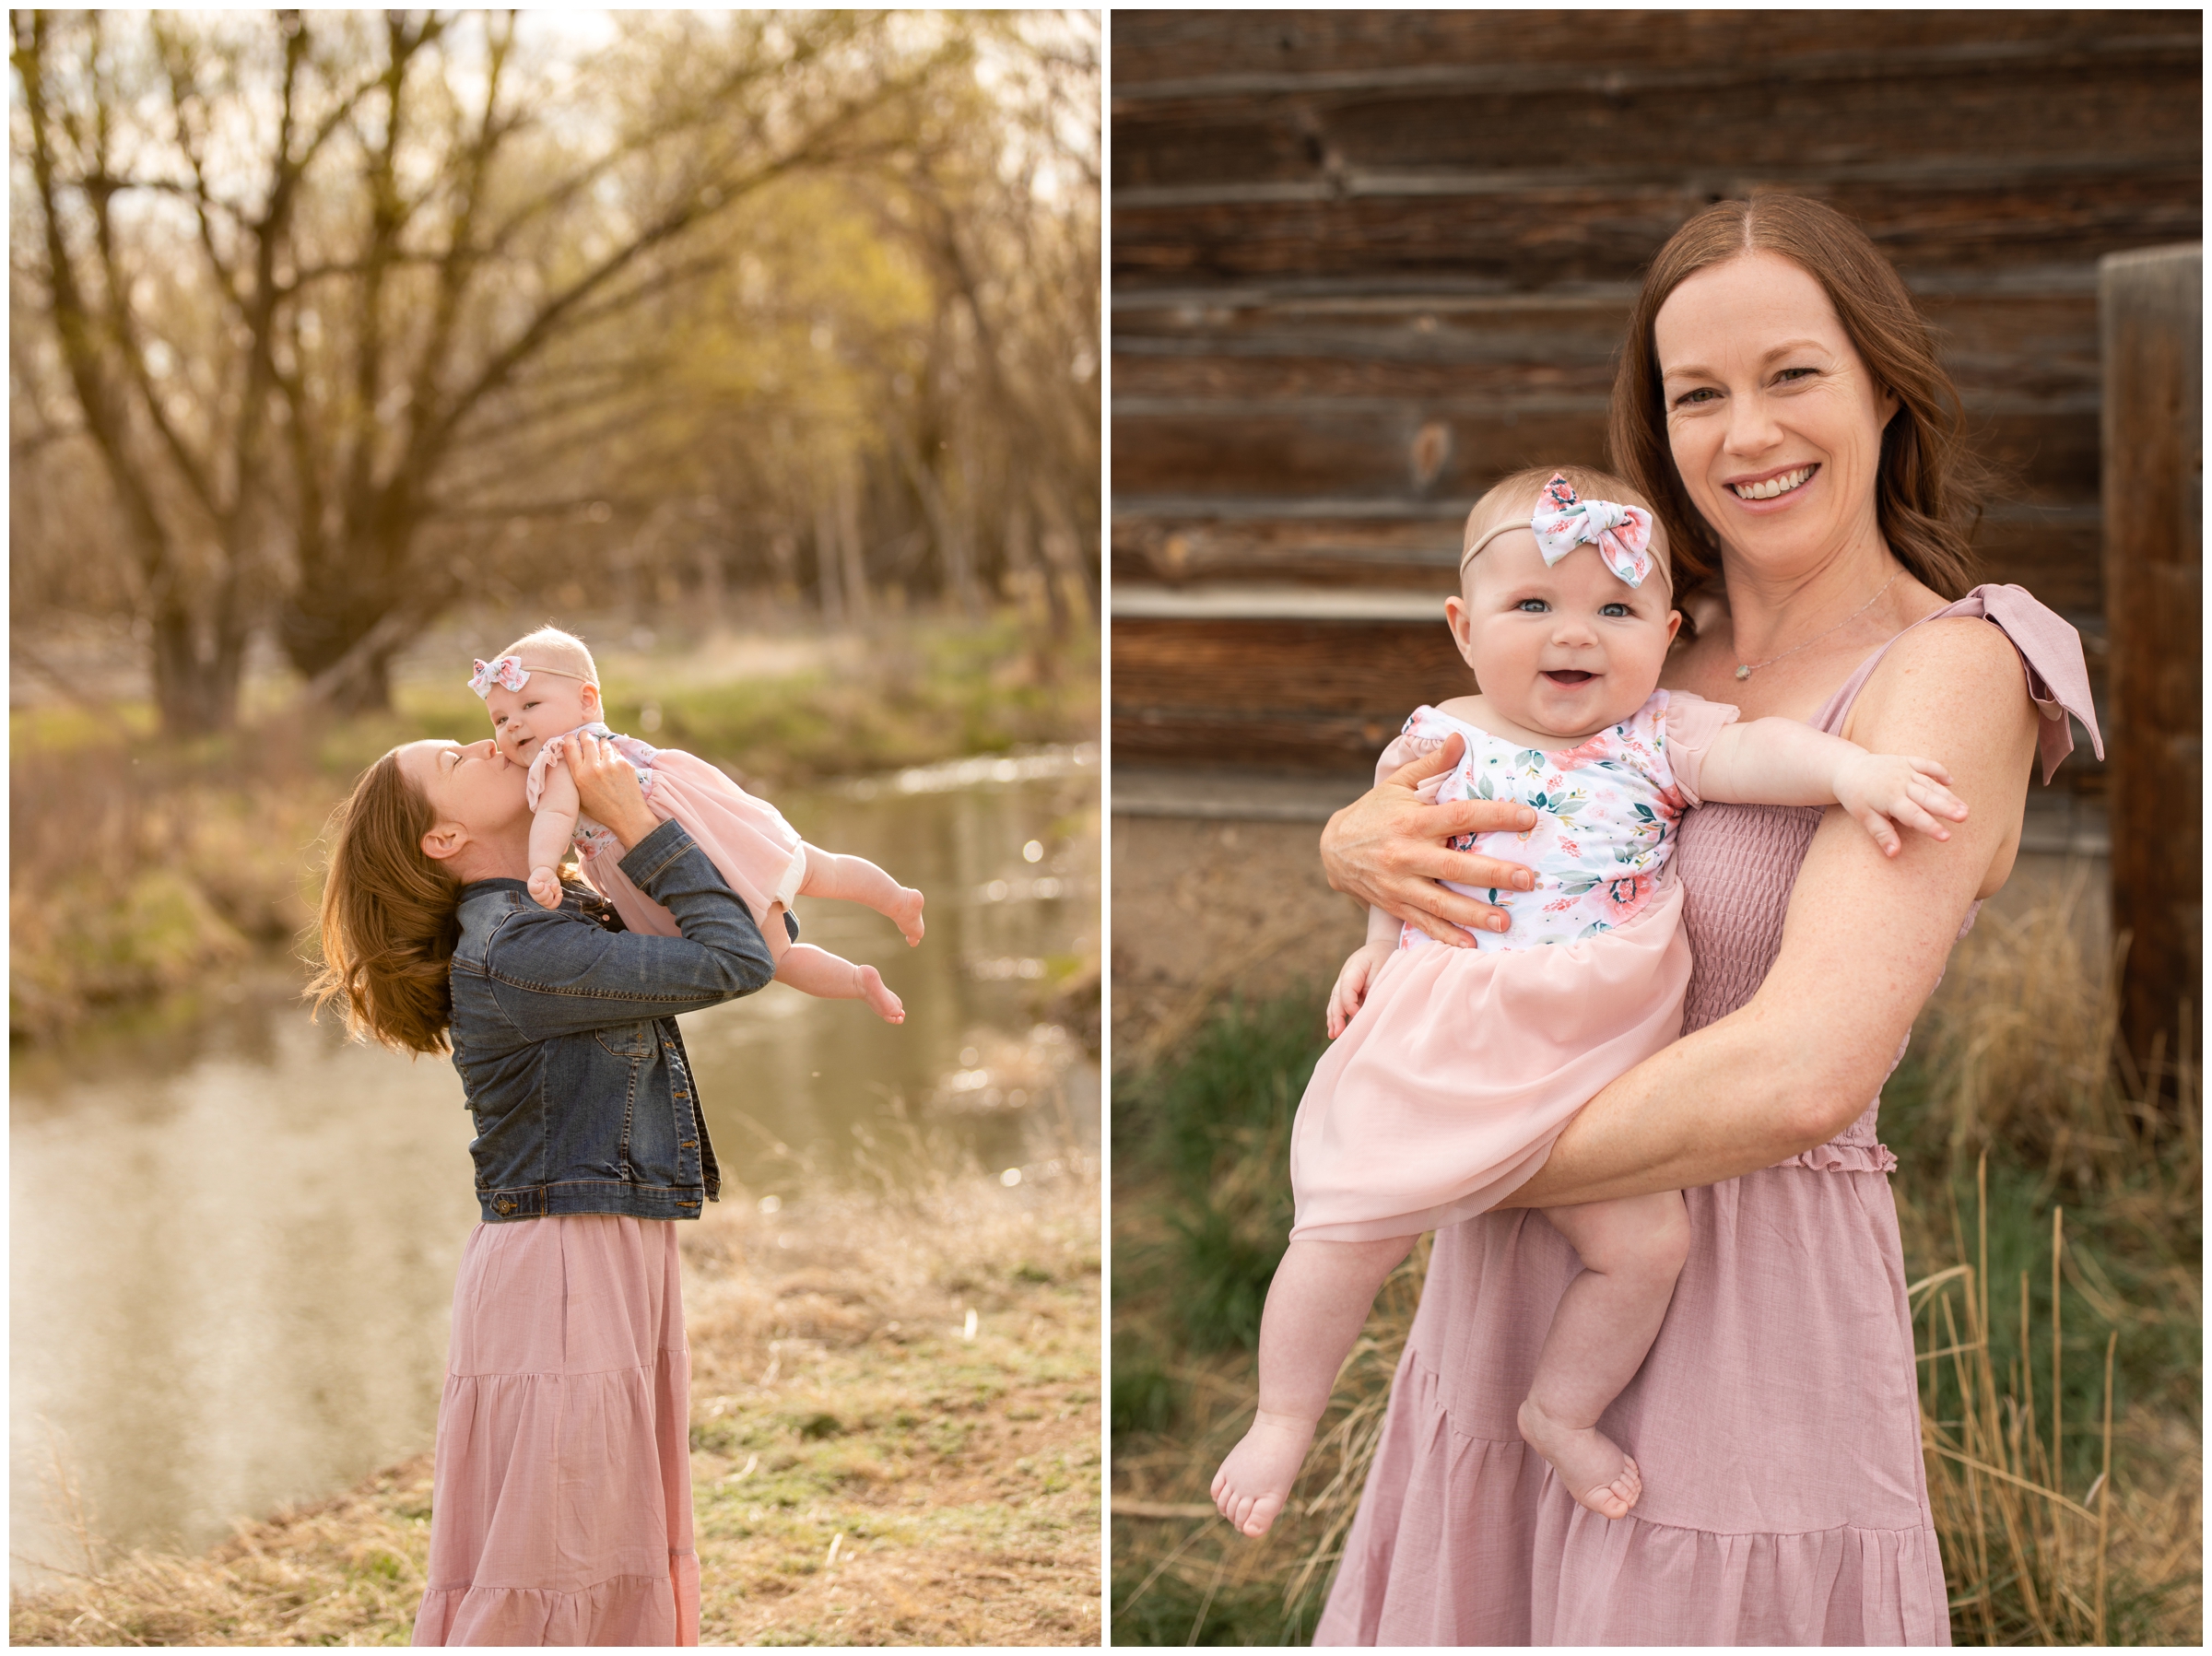 mom lifting baby daughter in the air during Longmont Colorado family portraits at Sandstone Ranch during spring 